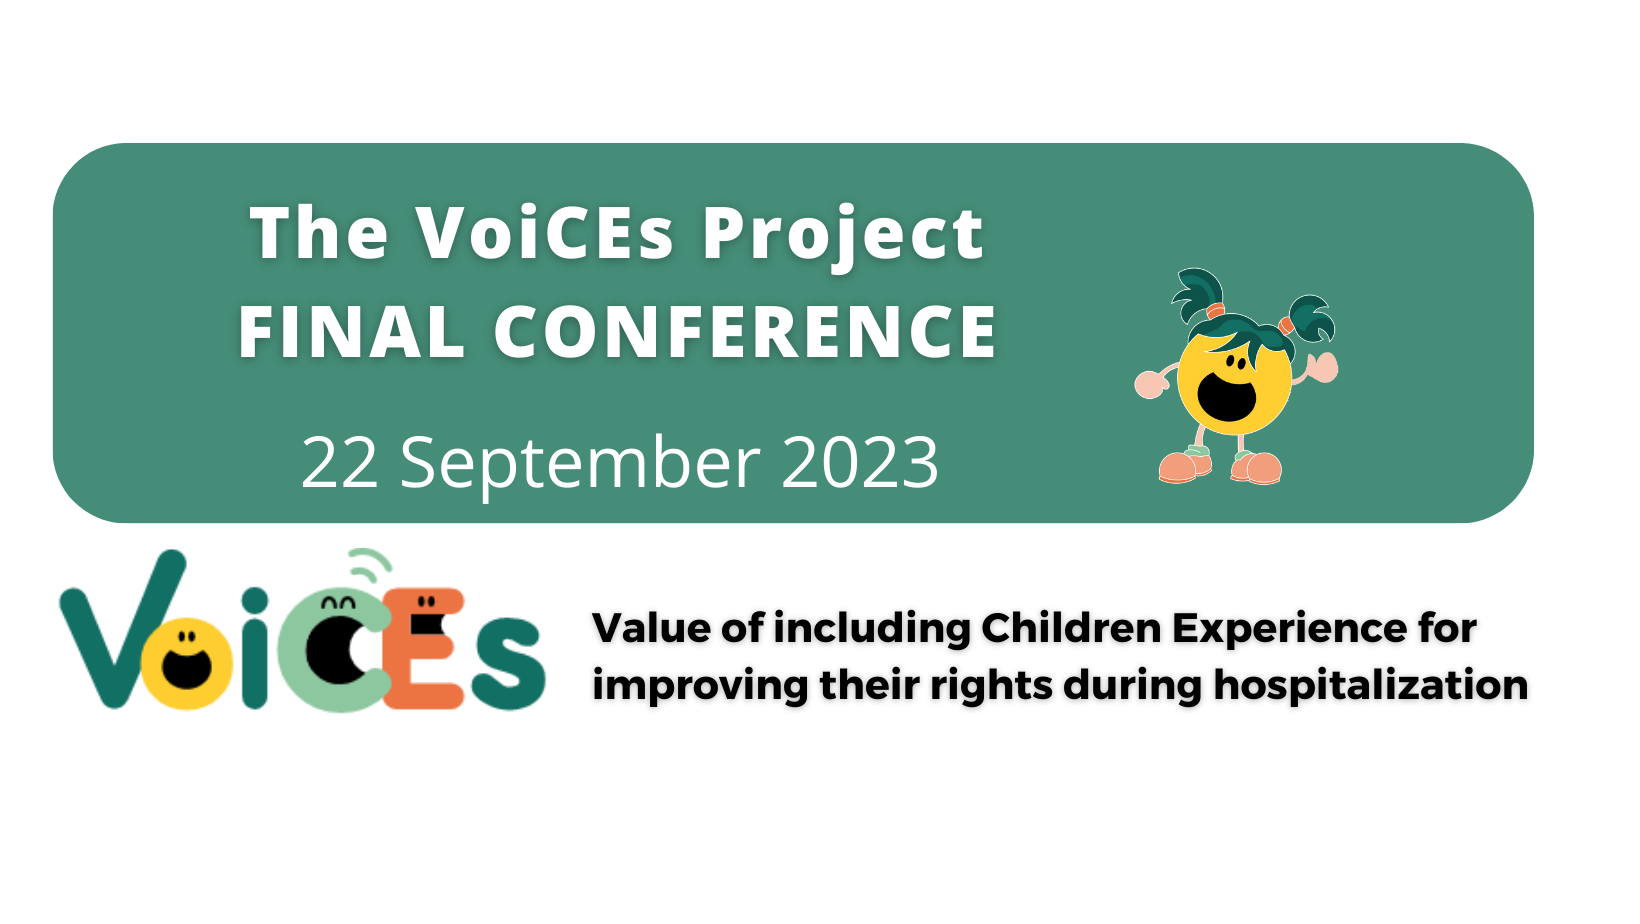 Final Conference of the VoiCEs Project (22 September 2023)